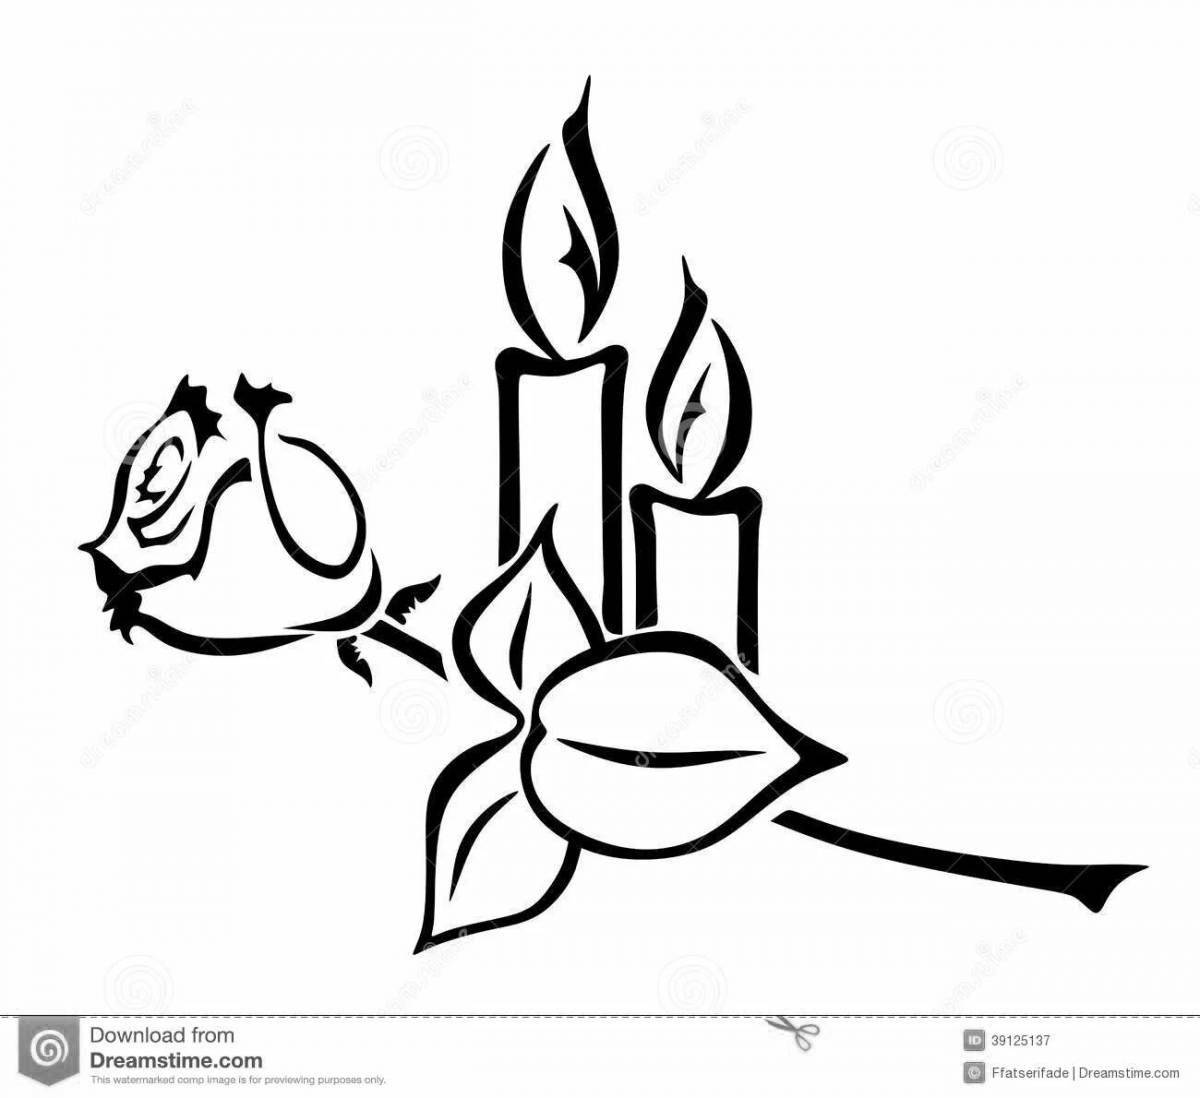 Playful memory candle coloring page for kids